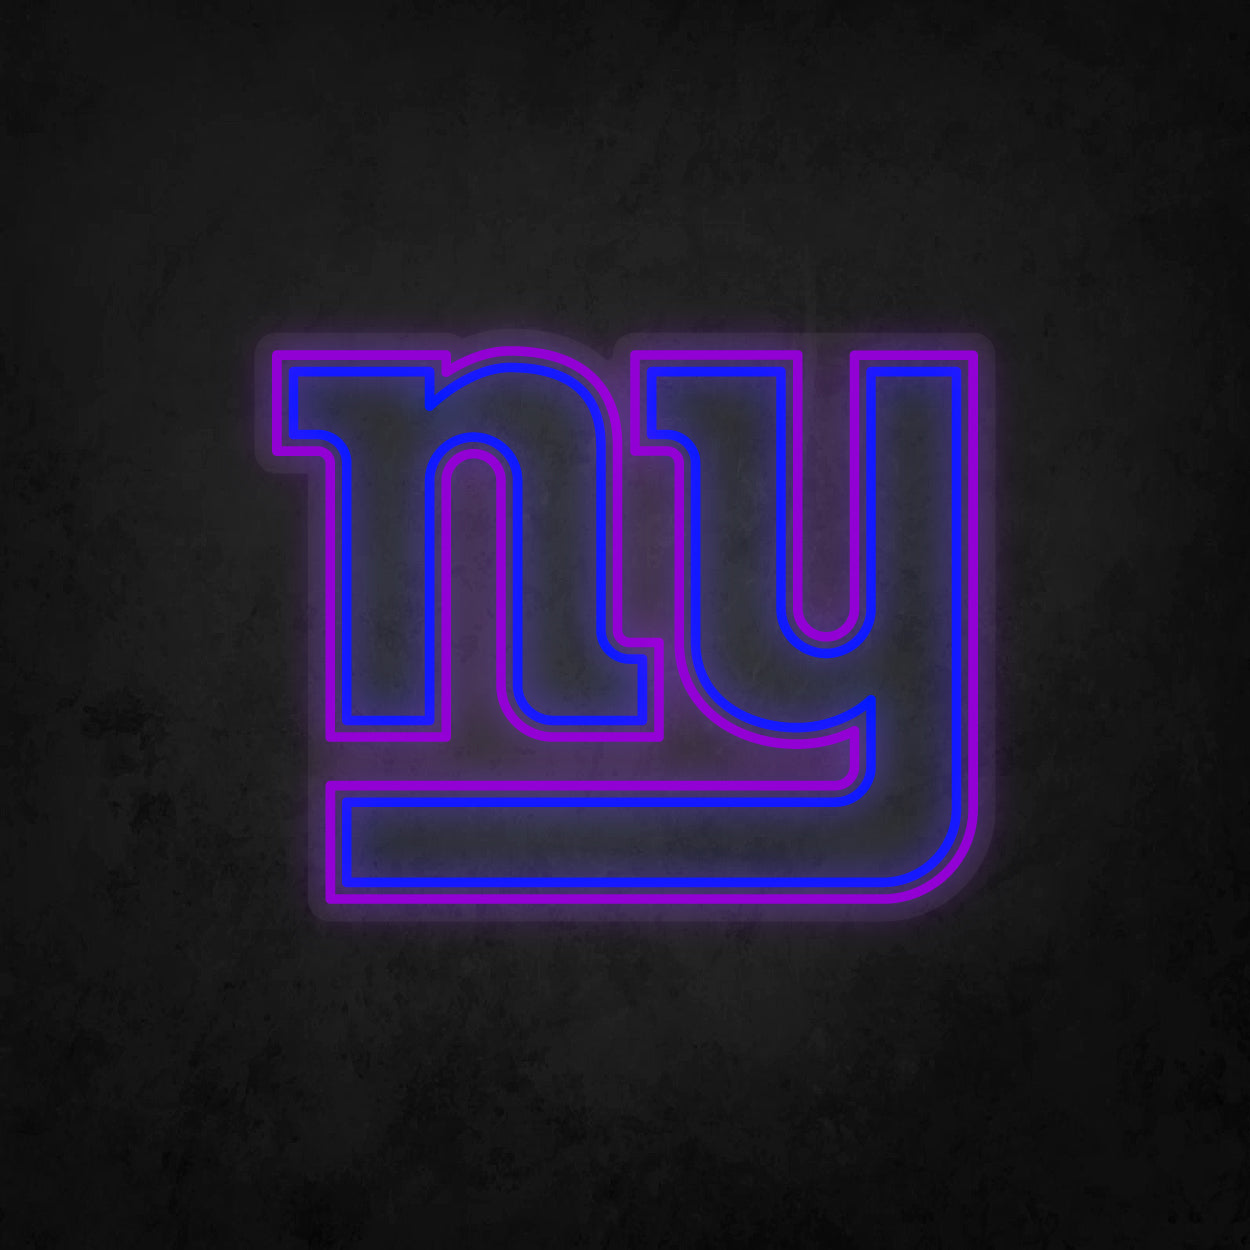 LED Neon Sign - New York Giants Large